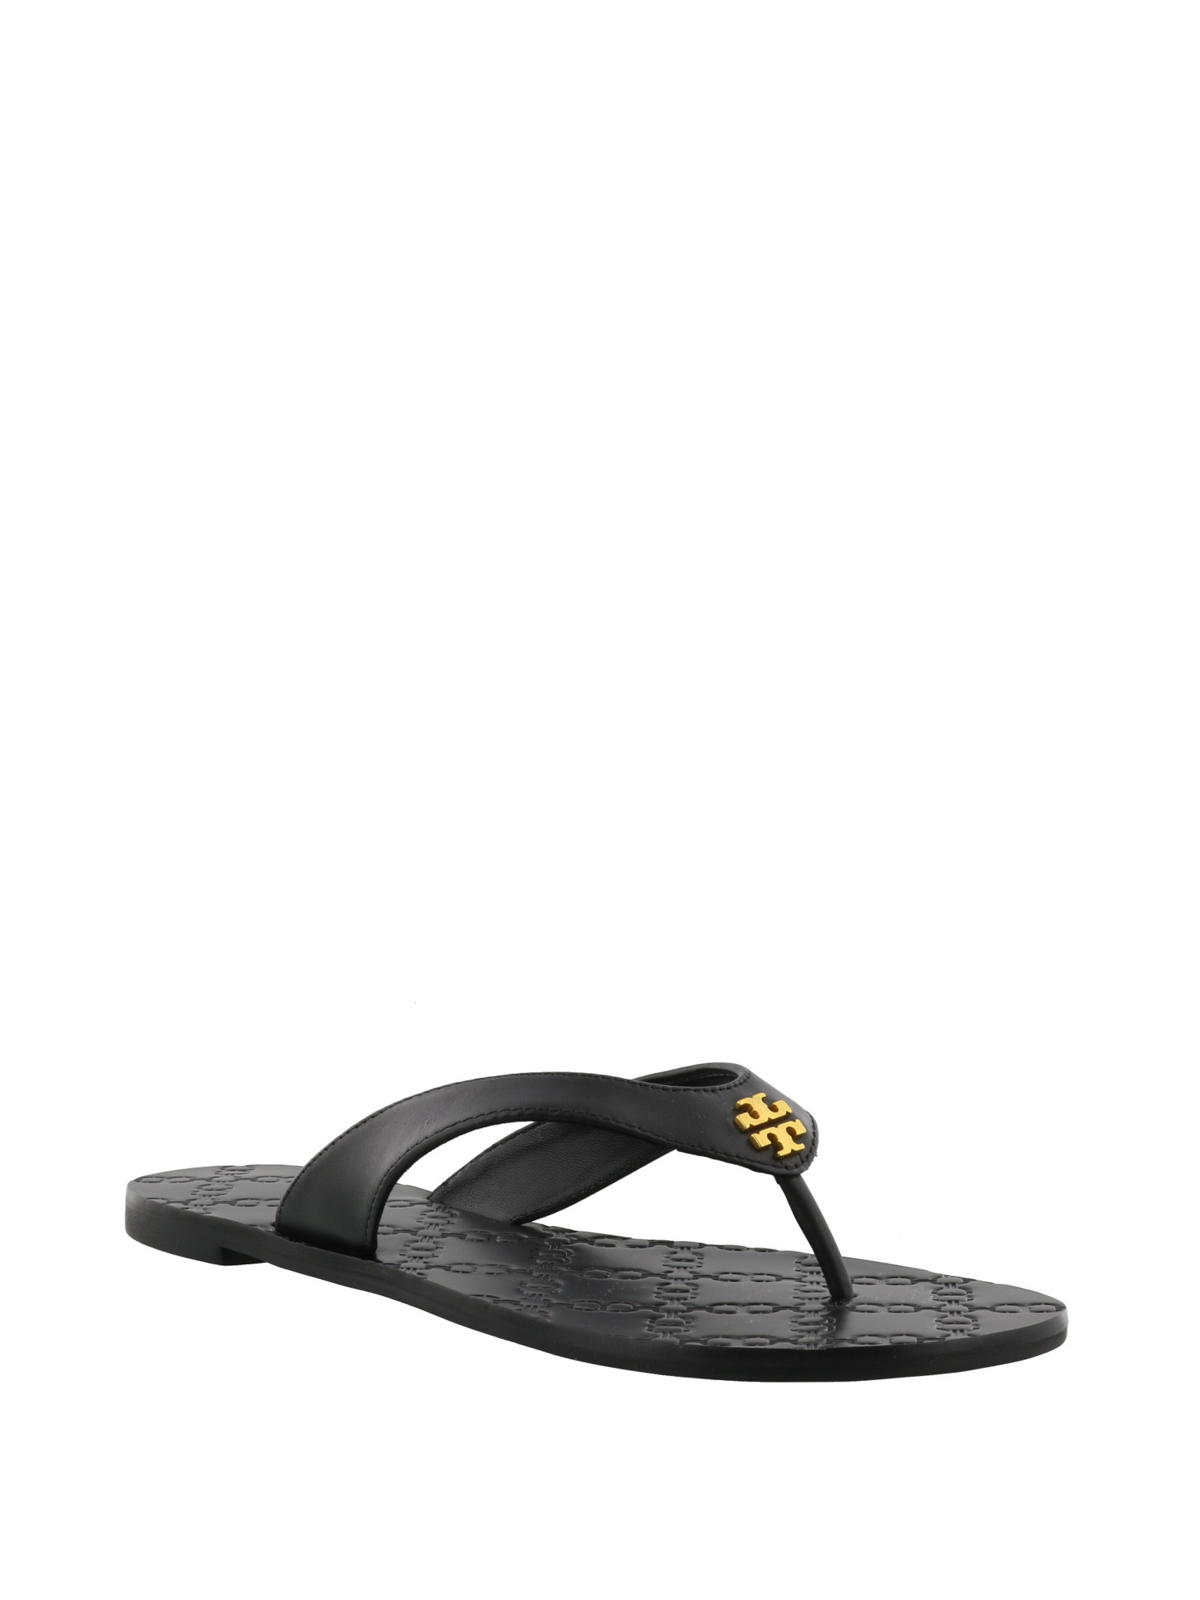 Sandals Tory Burch - Monroe black leather thong sandals - 39670001